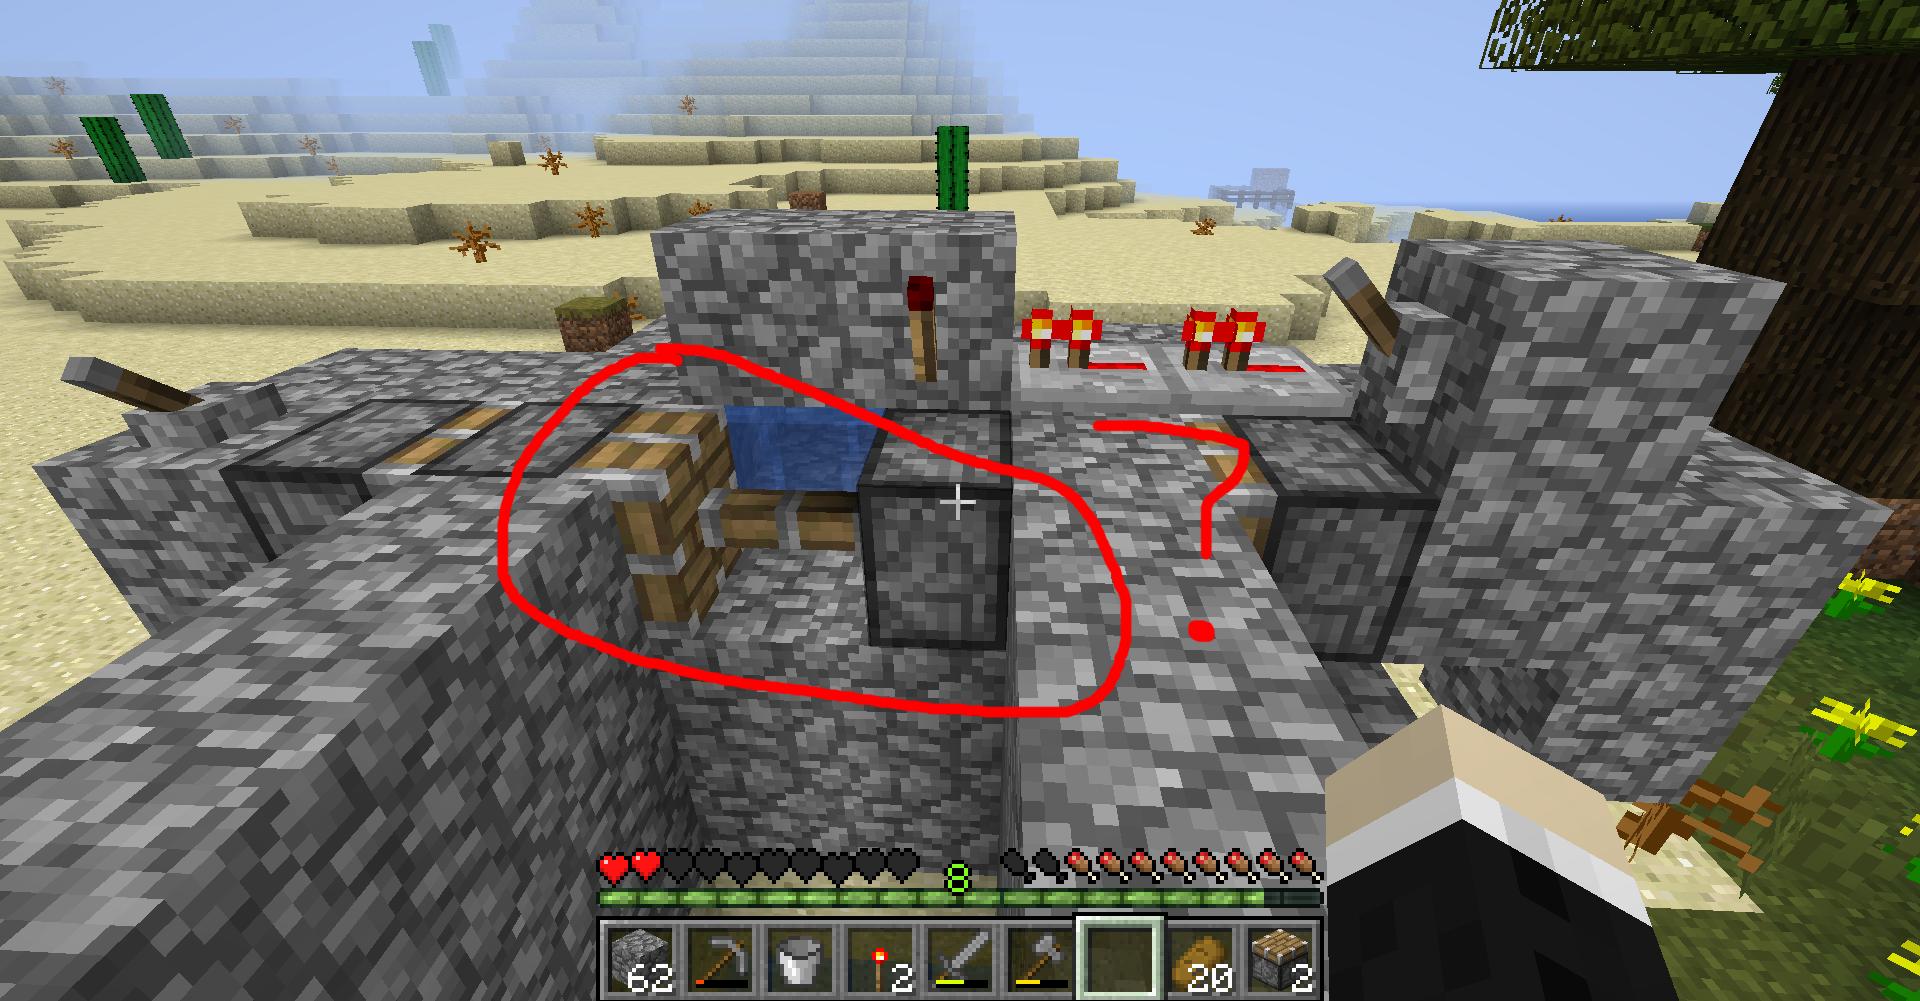 Can a redstone latch in Minecraft Java Edition be supplemented with a toggle function?